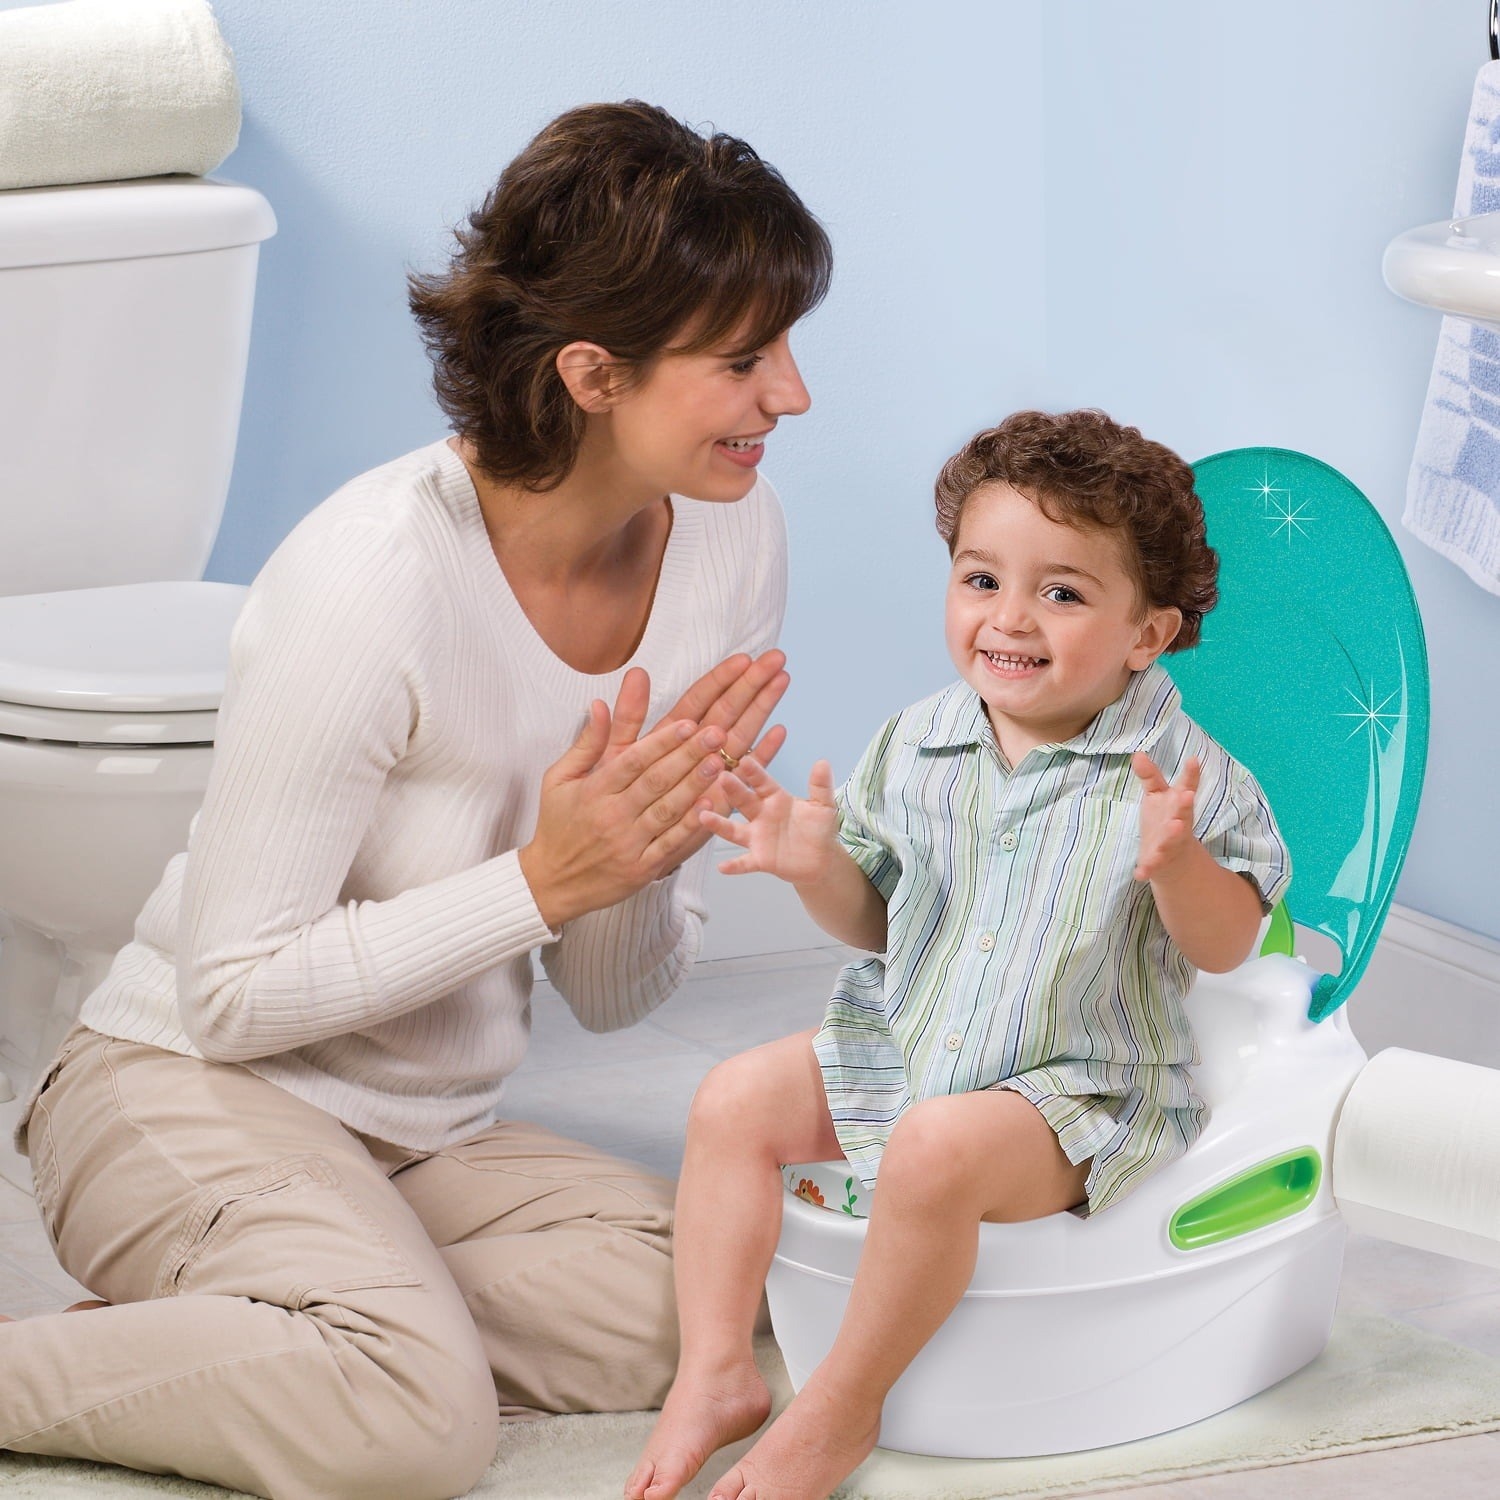 A parent clapping as her child sits on the training potty.